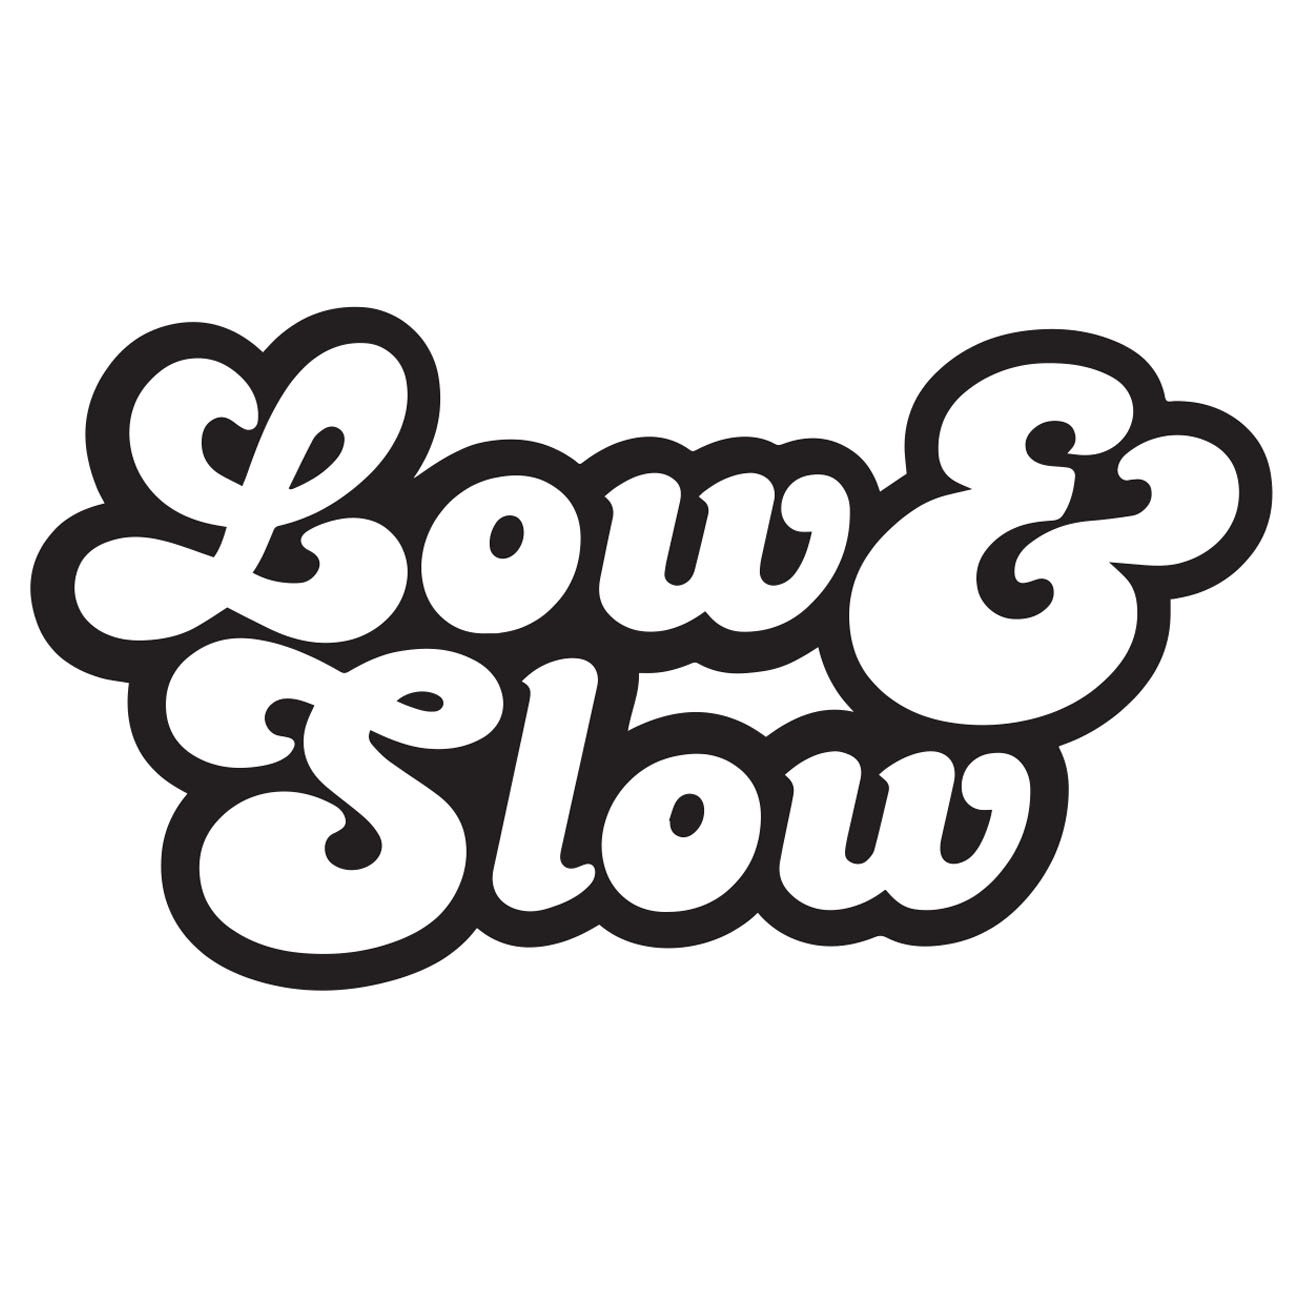 Low and slow 1